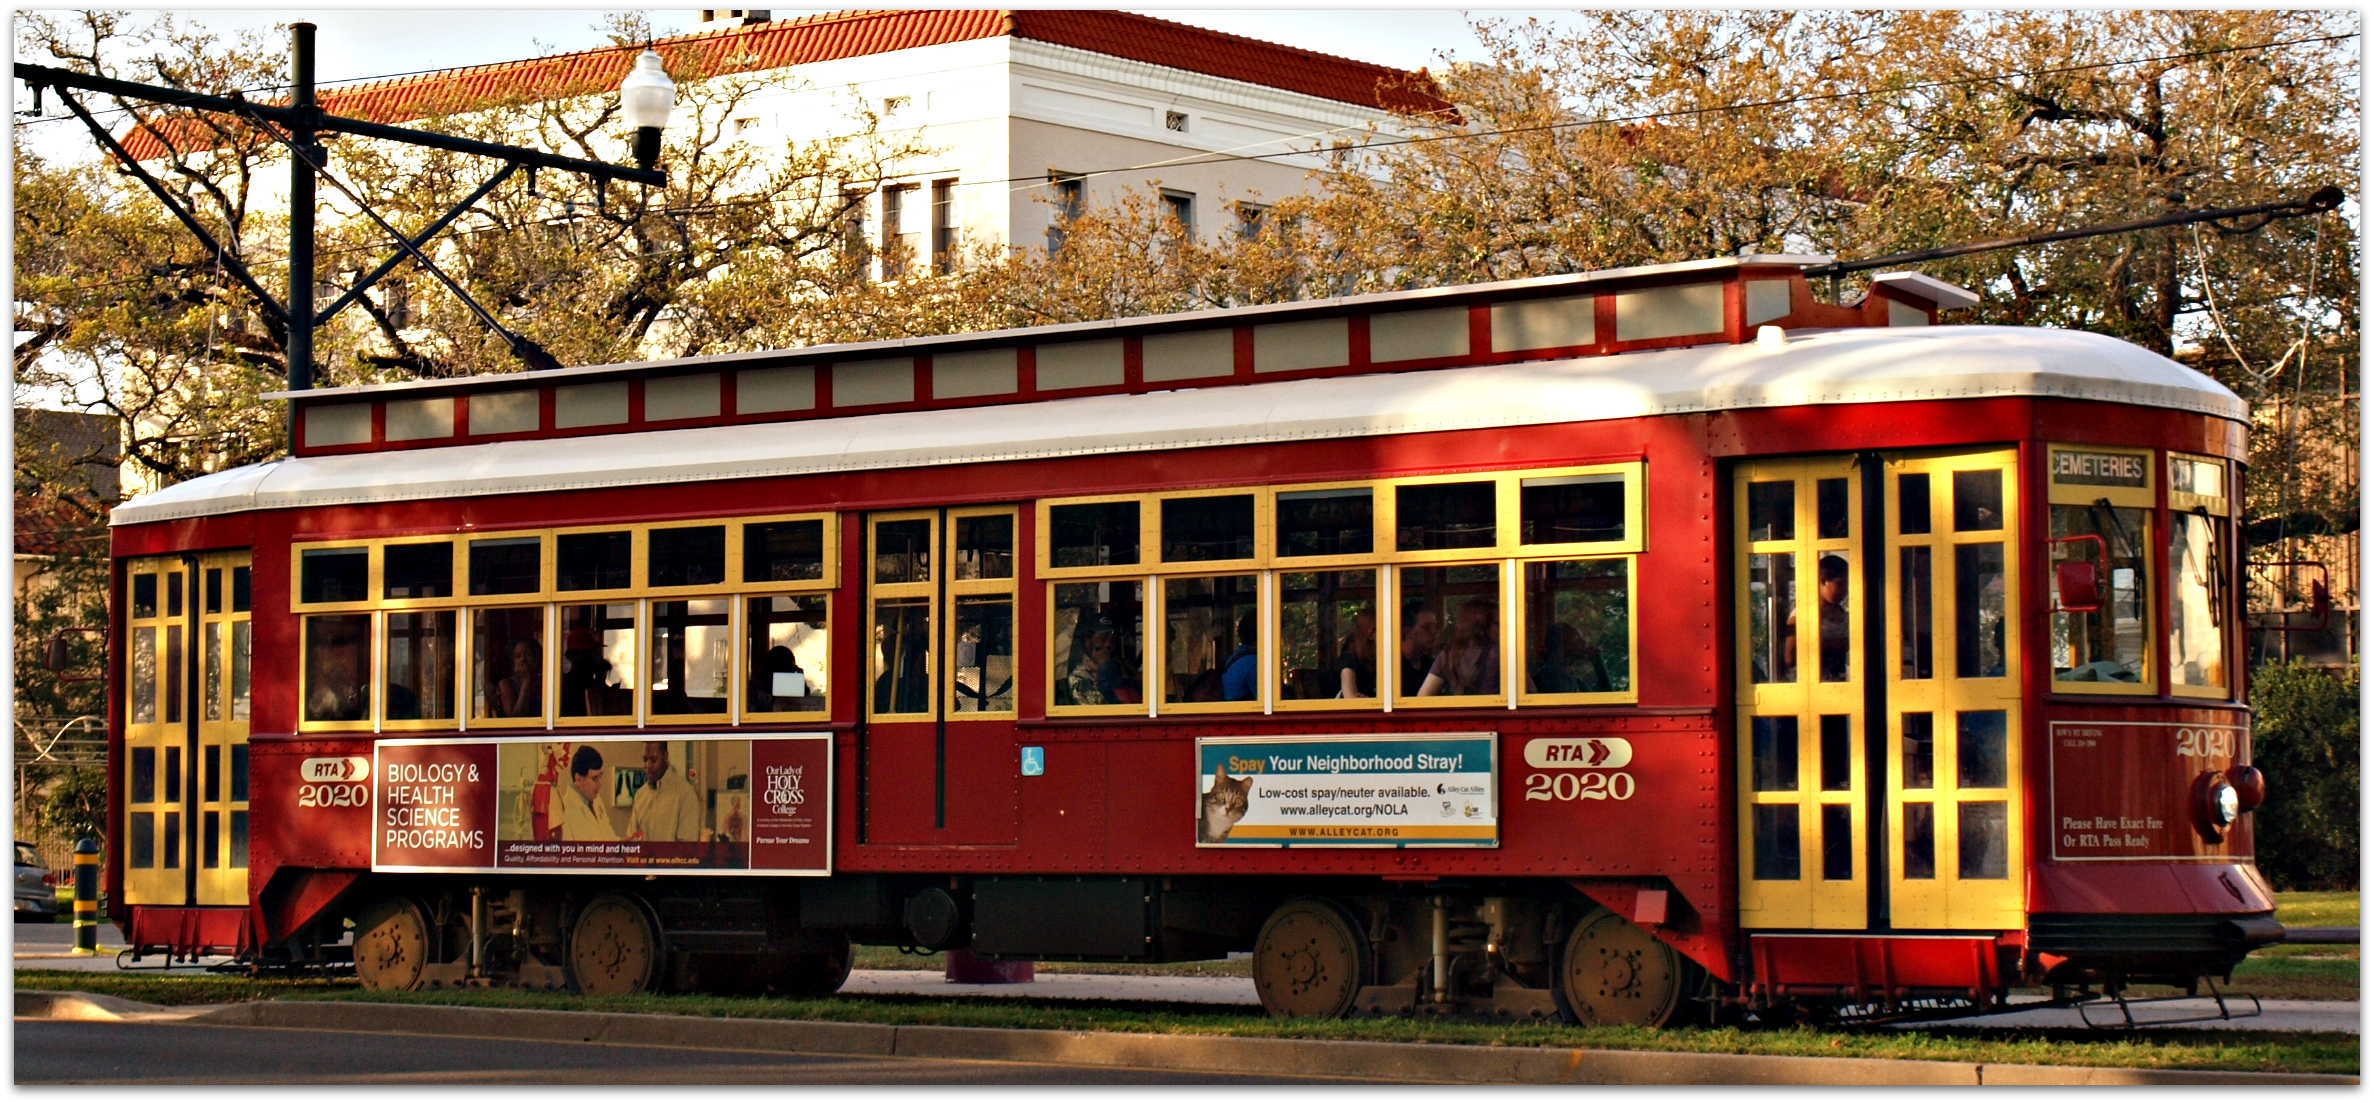 New Orleans Homes and Neighborhoods » New Orleans Streetcars